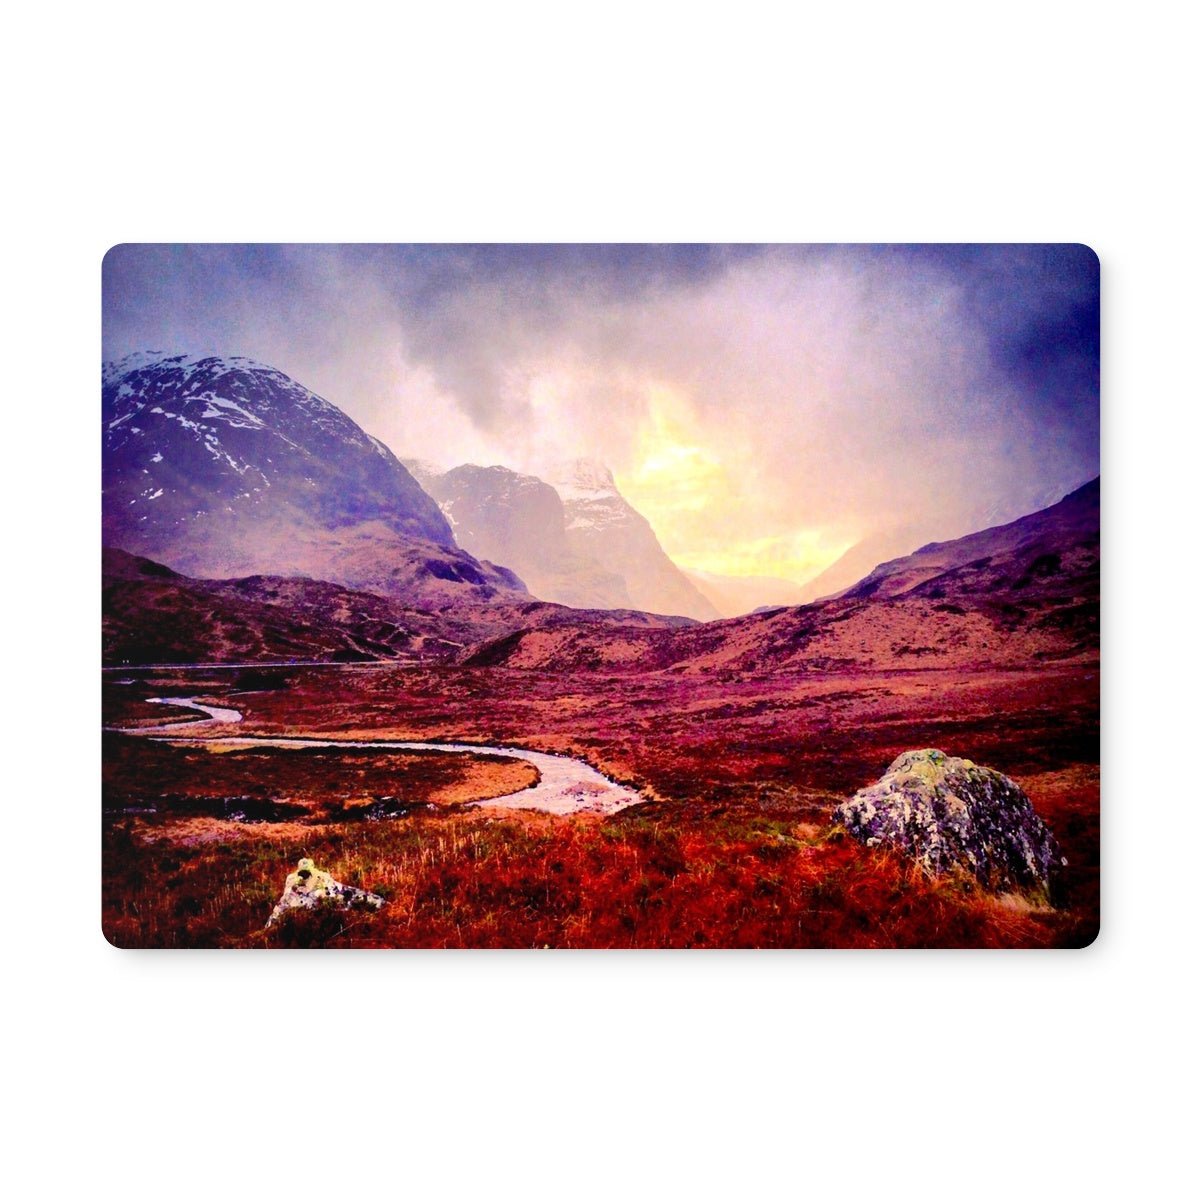 A Brooding Glencoe Art Gifts Placemat-Placemats-Glencoe Art Gallery-6 Placemats-Paintings, Prints, Homeware, Art Gifts From Scotland By Scottish Artist Kevin Hunter